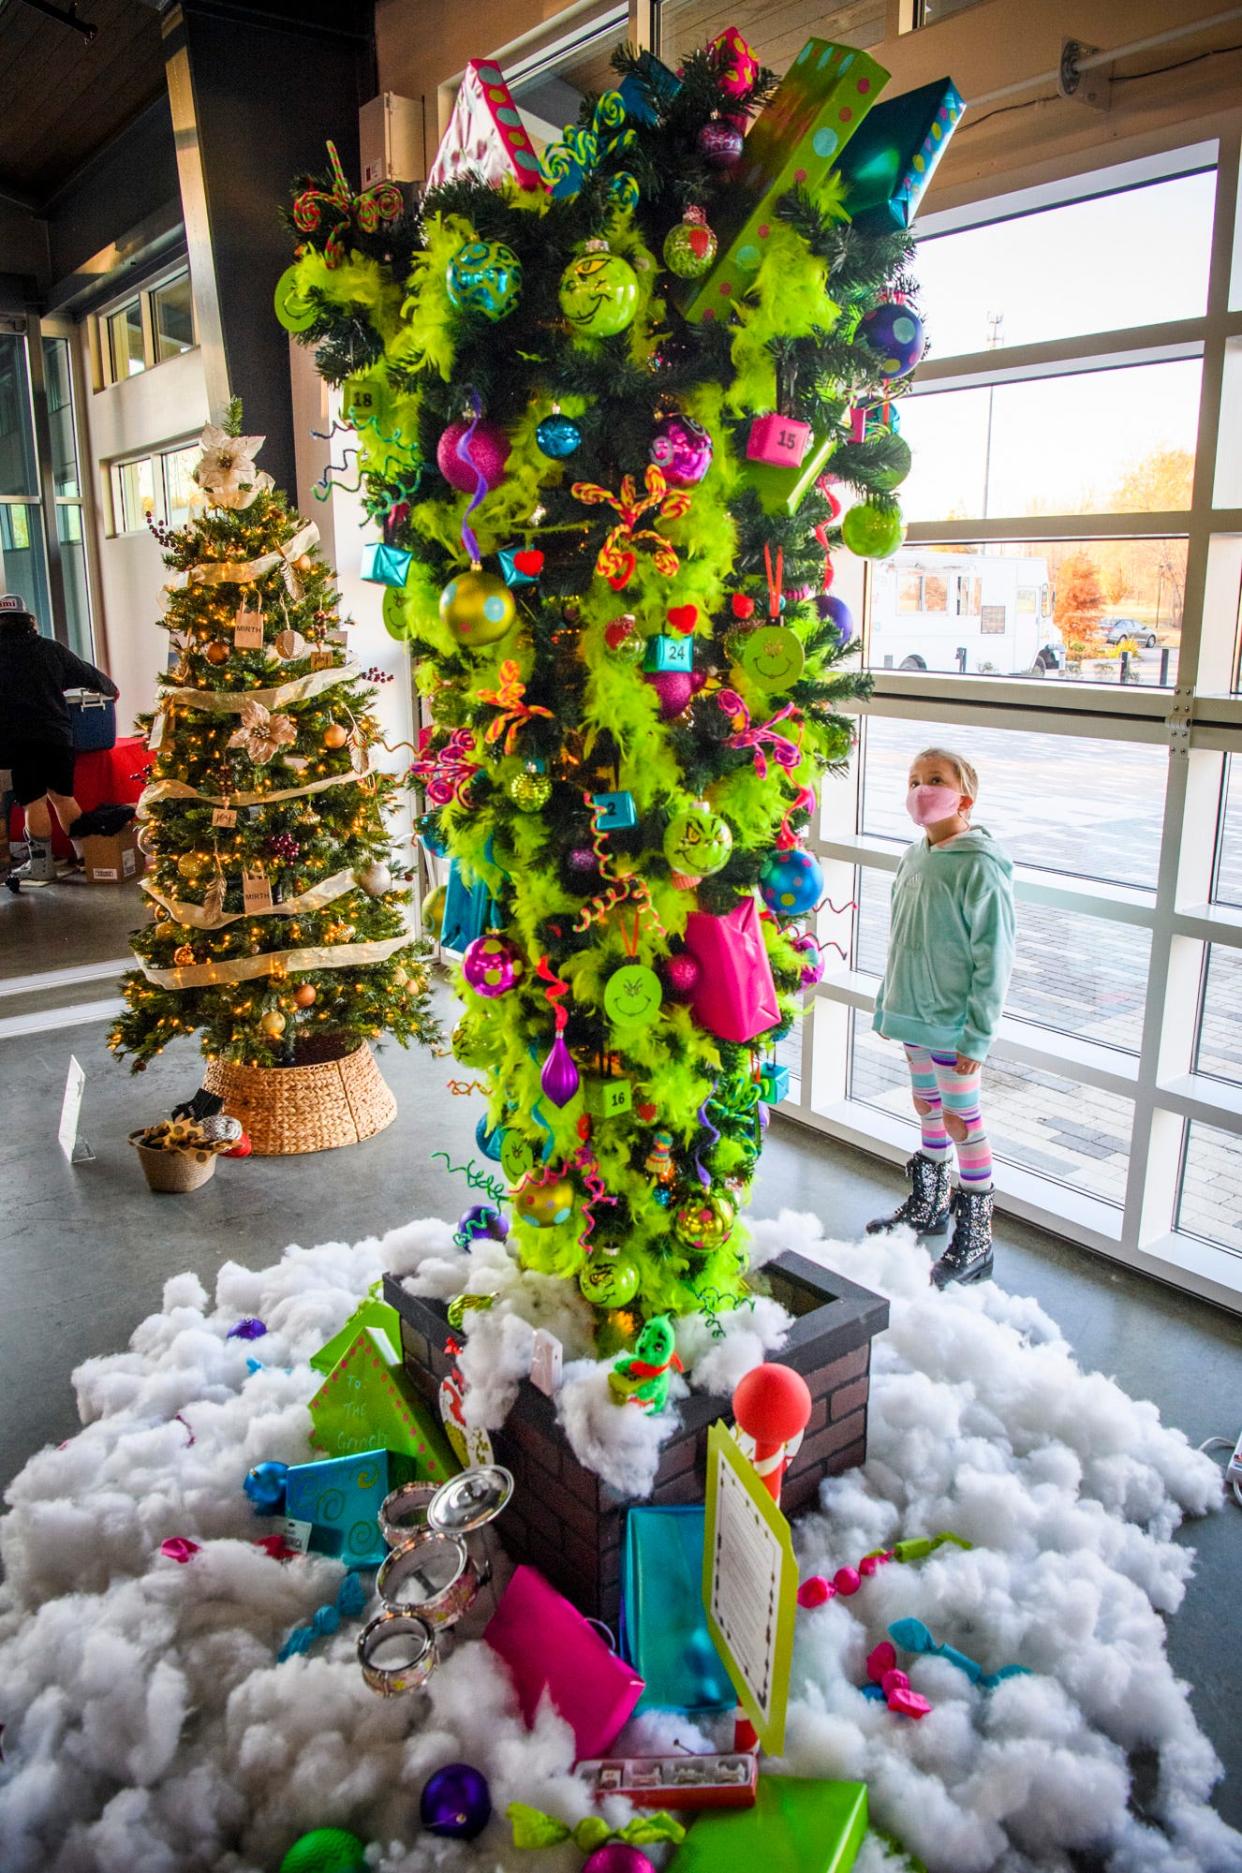 Nora Walker looks at the "You're a Mean One, Mr. Grinch" tree donated by TASUS Corp. at the Hope for the Holidays Tree Extravaganza & Auction benefitting New Hope For Families at the Switchyard Park Pavilion on Nov. 18.